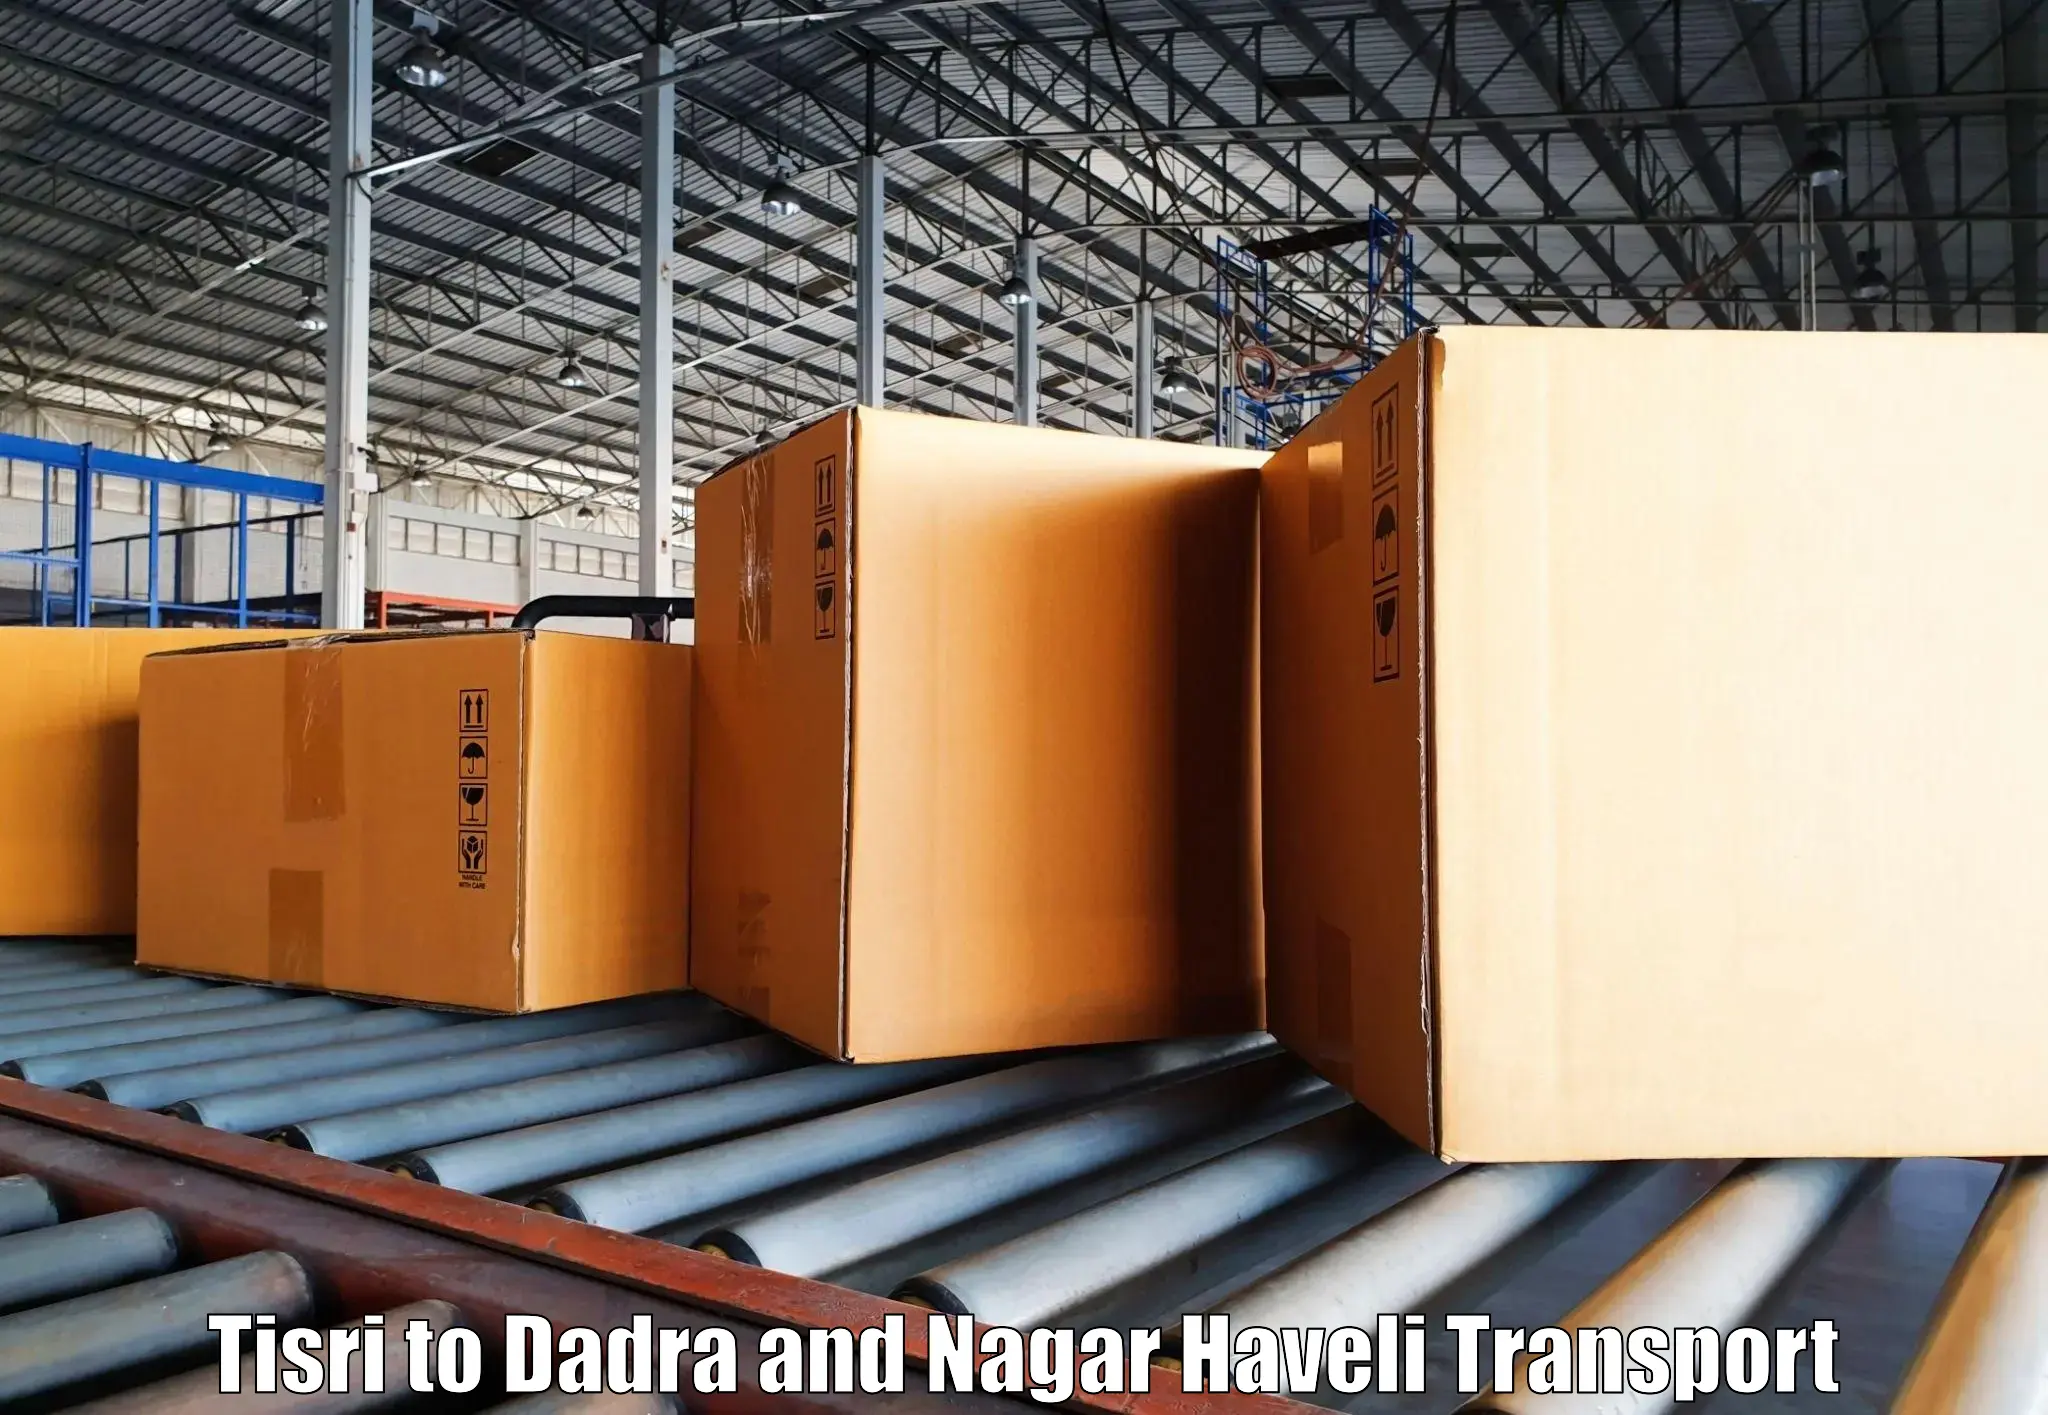 Transport bike from one state to another in Tisri to Dadra and Nagar Haveli